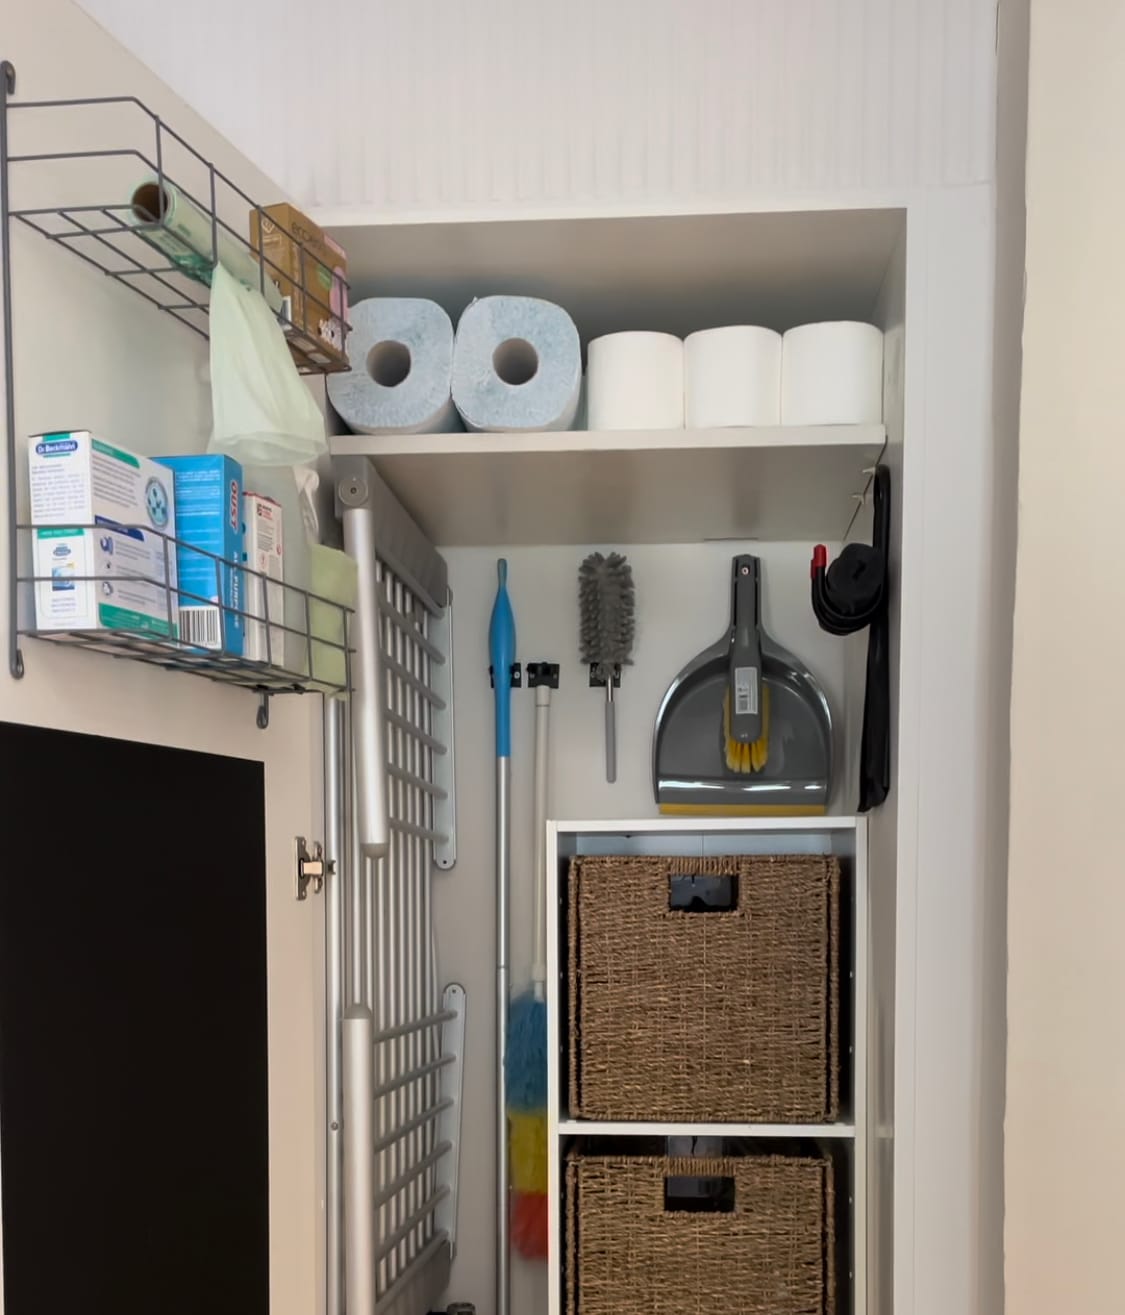 Utility cupboard: You need these space-saving hacks!